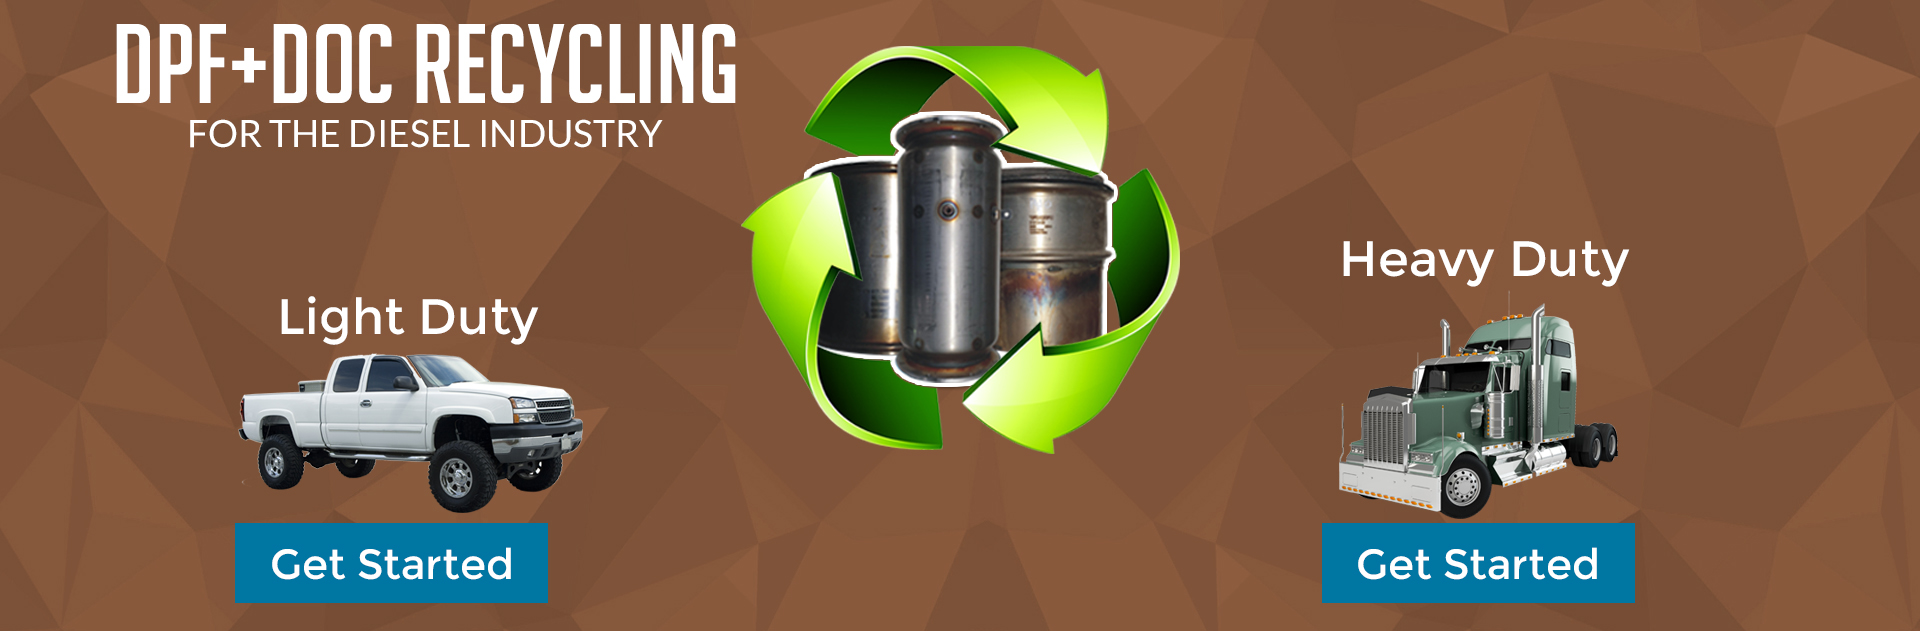 DPF & DOC Recycling for the diesel industry. We purchase parts from